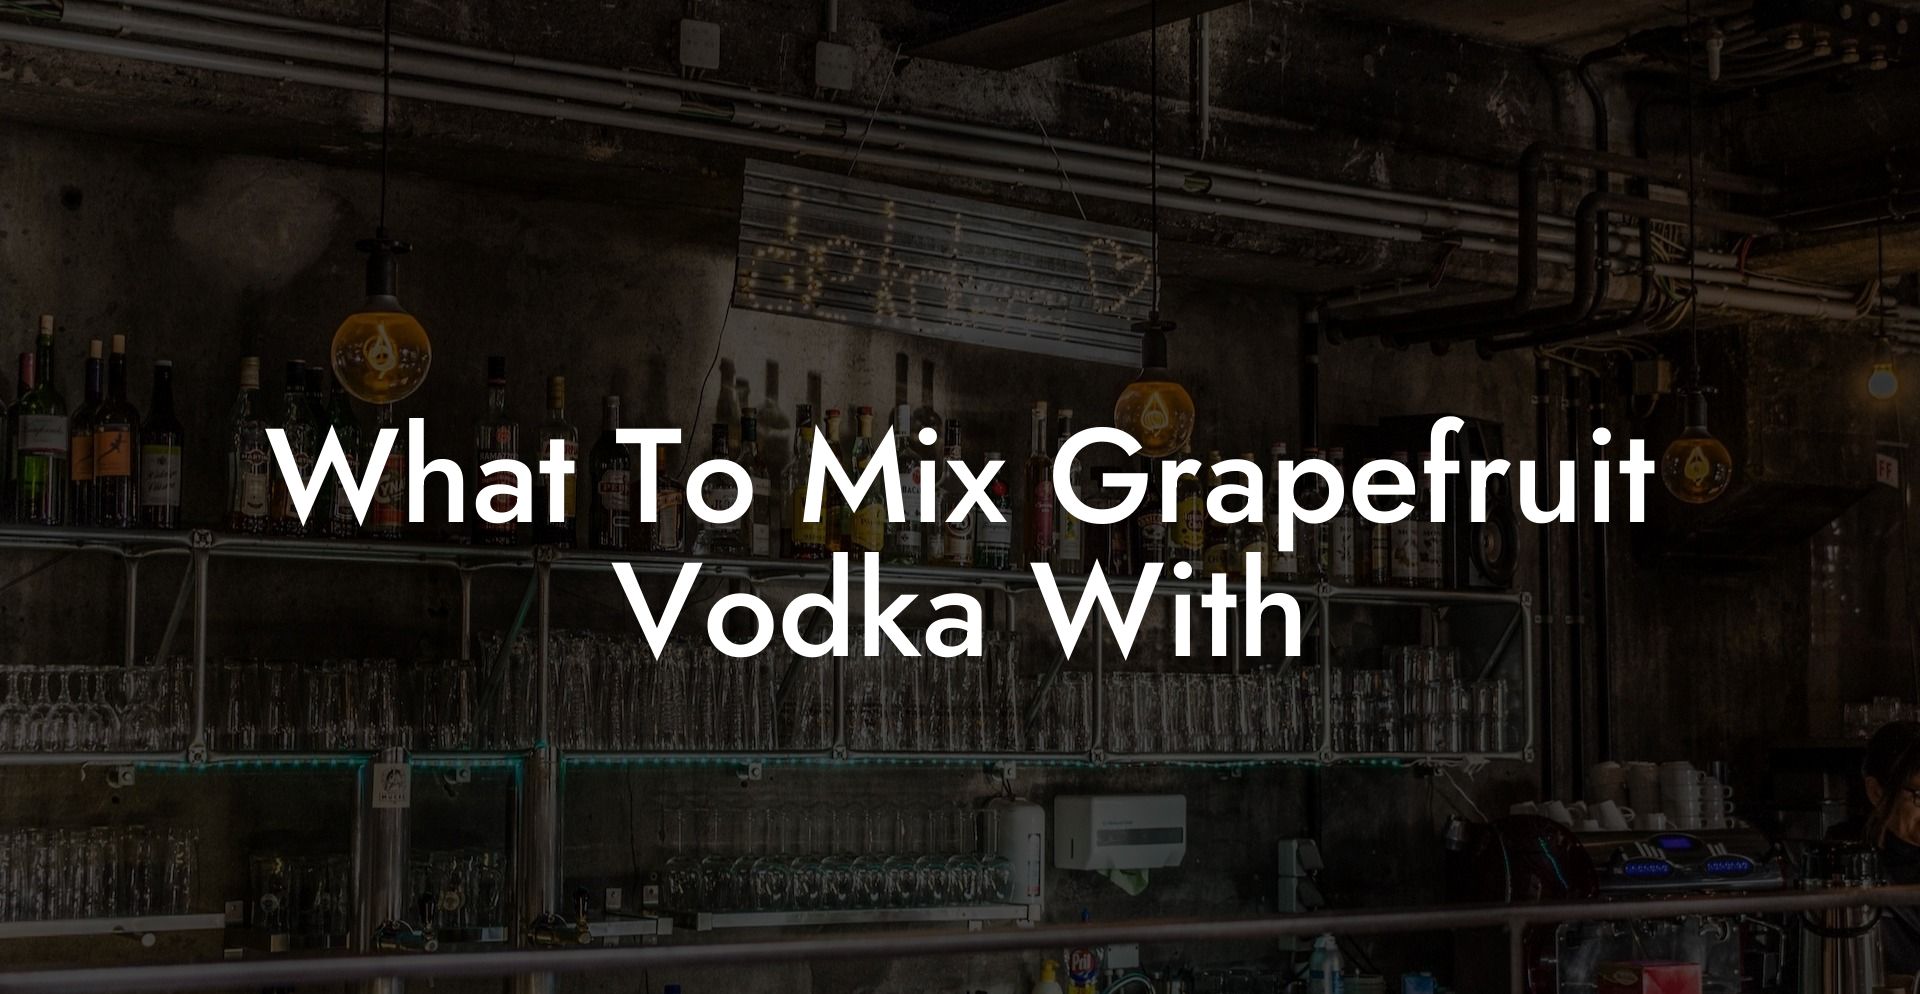 What To Mix Grapefruit Vodka With